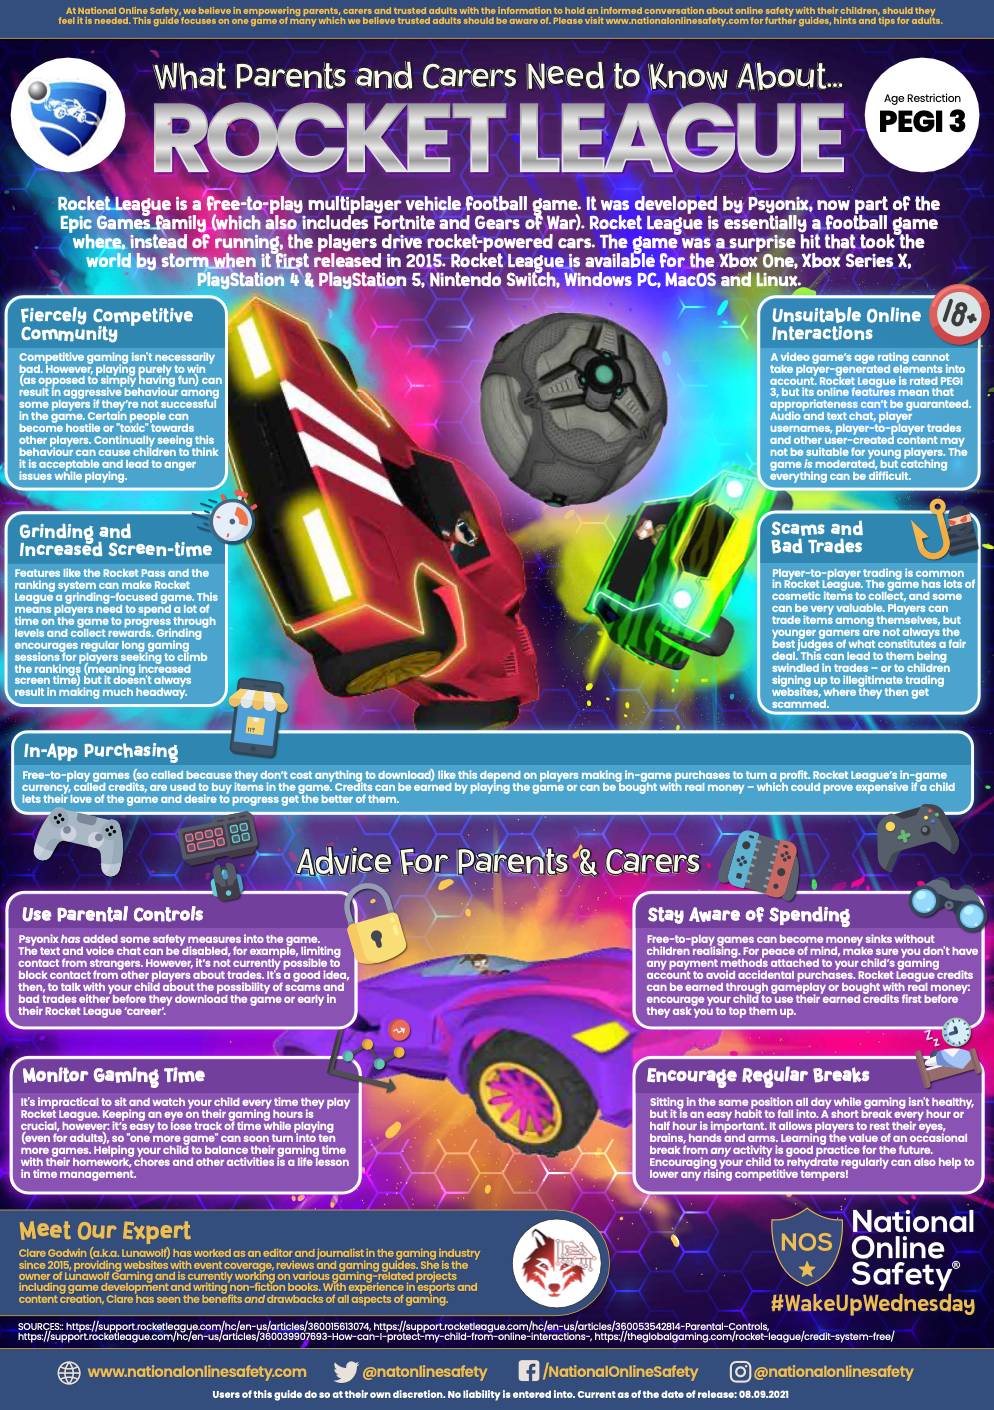 What parents need to know about Rocket League